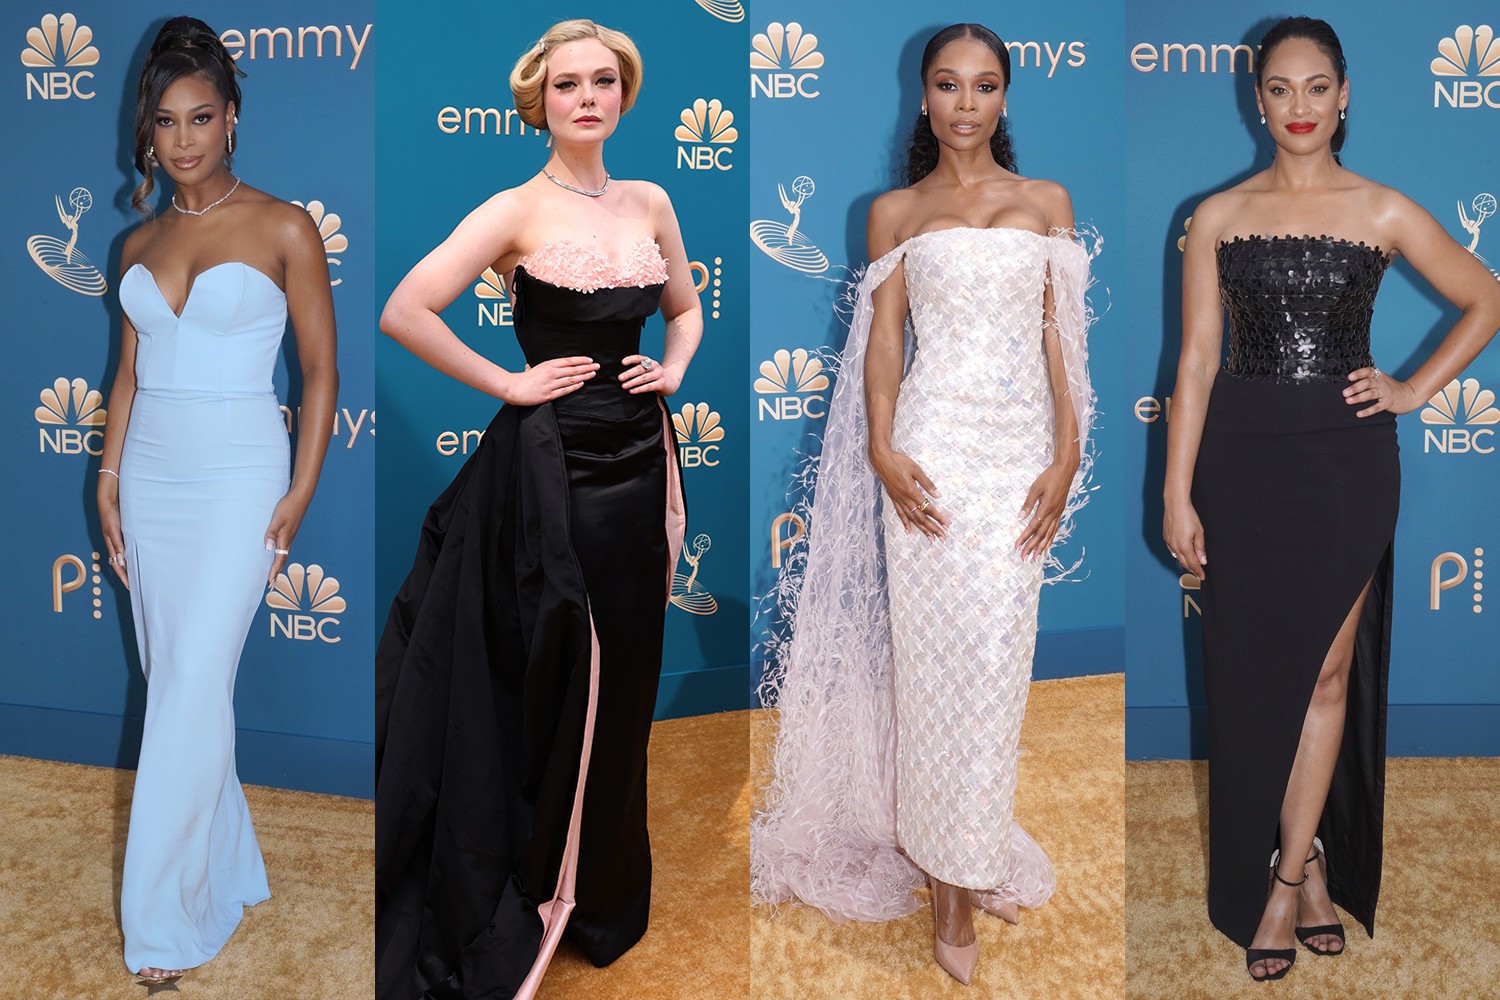 Ombro a ombro no Emmy Awards 2022 (Foto: Getty Images)